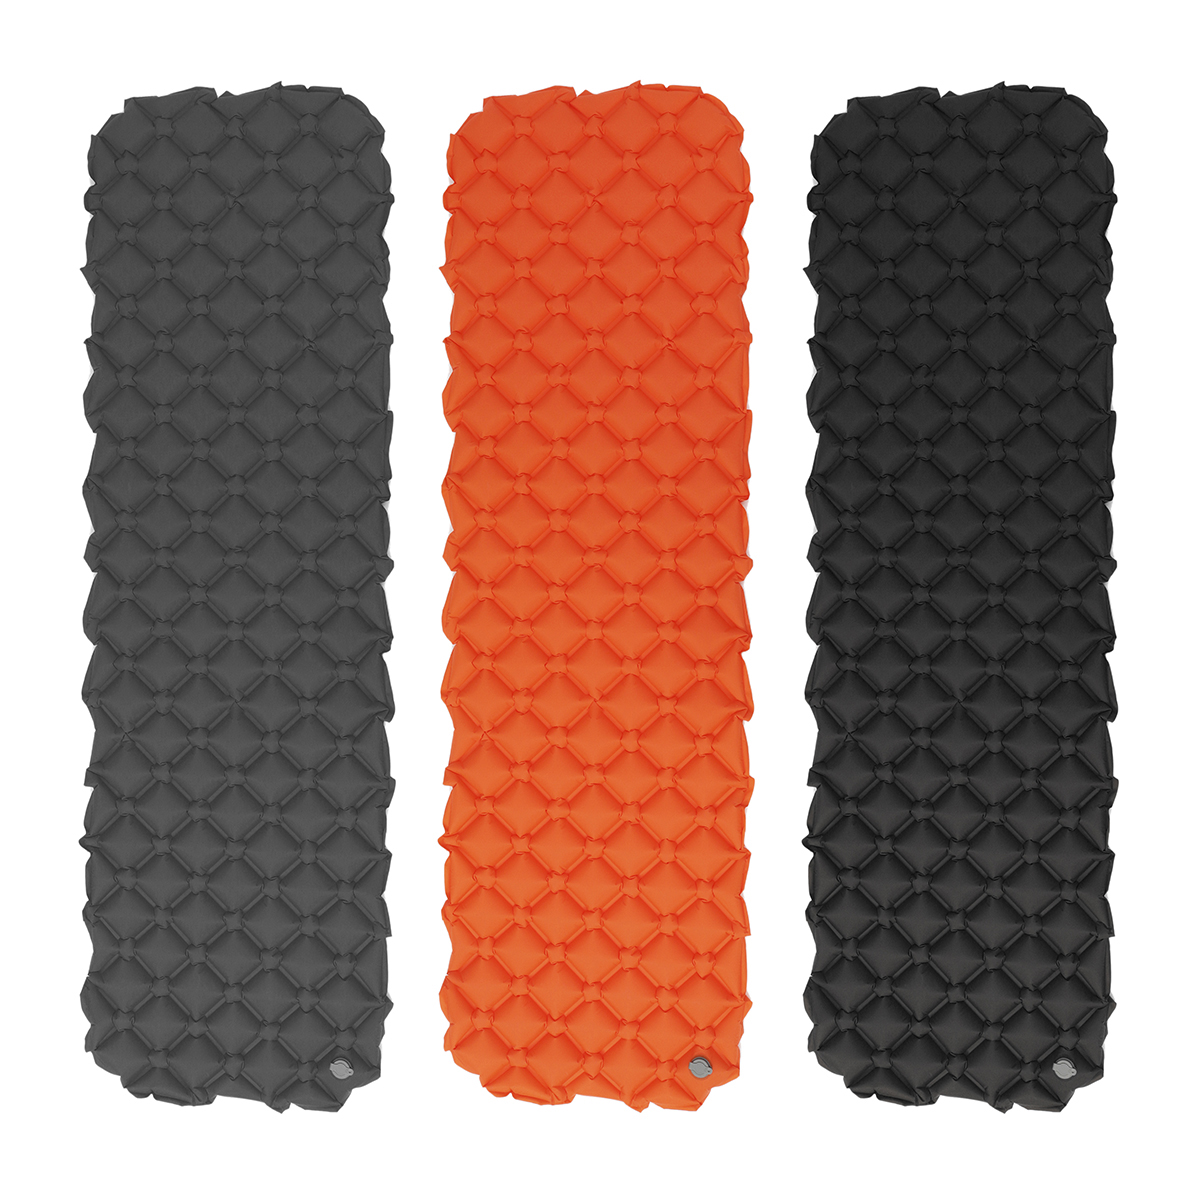 

Outdoor Inflatable Air Mattresses Sleeping Pad Moisture-proof Pad Camping Hiking